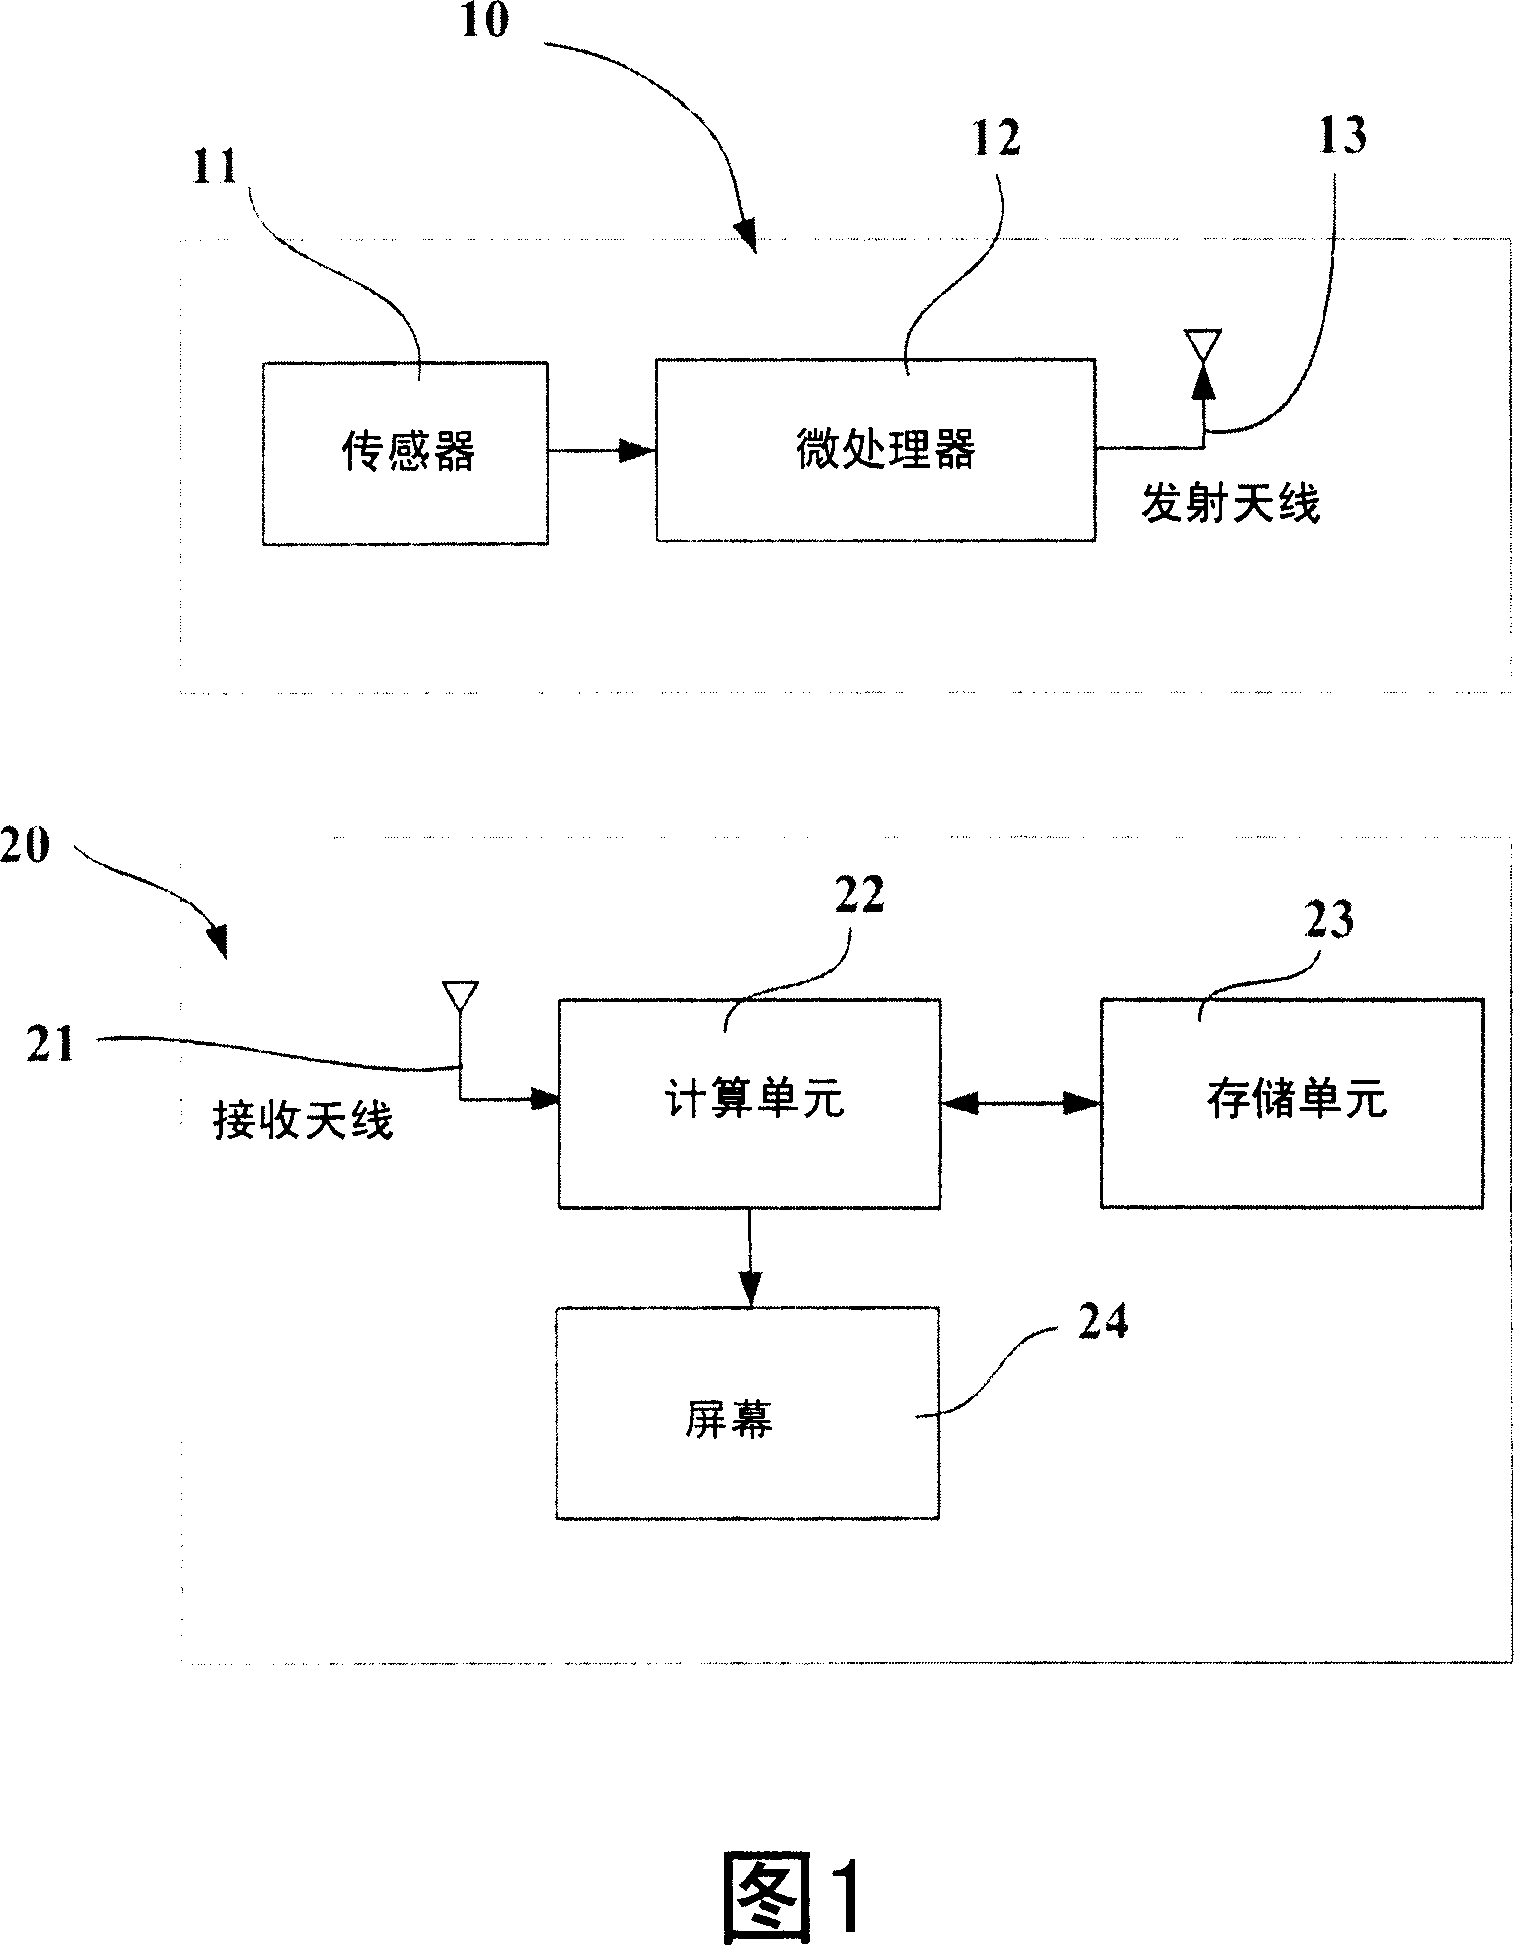 Method of processing data in a vehicle tyre monitoring system